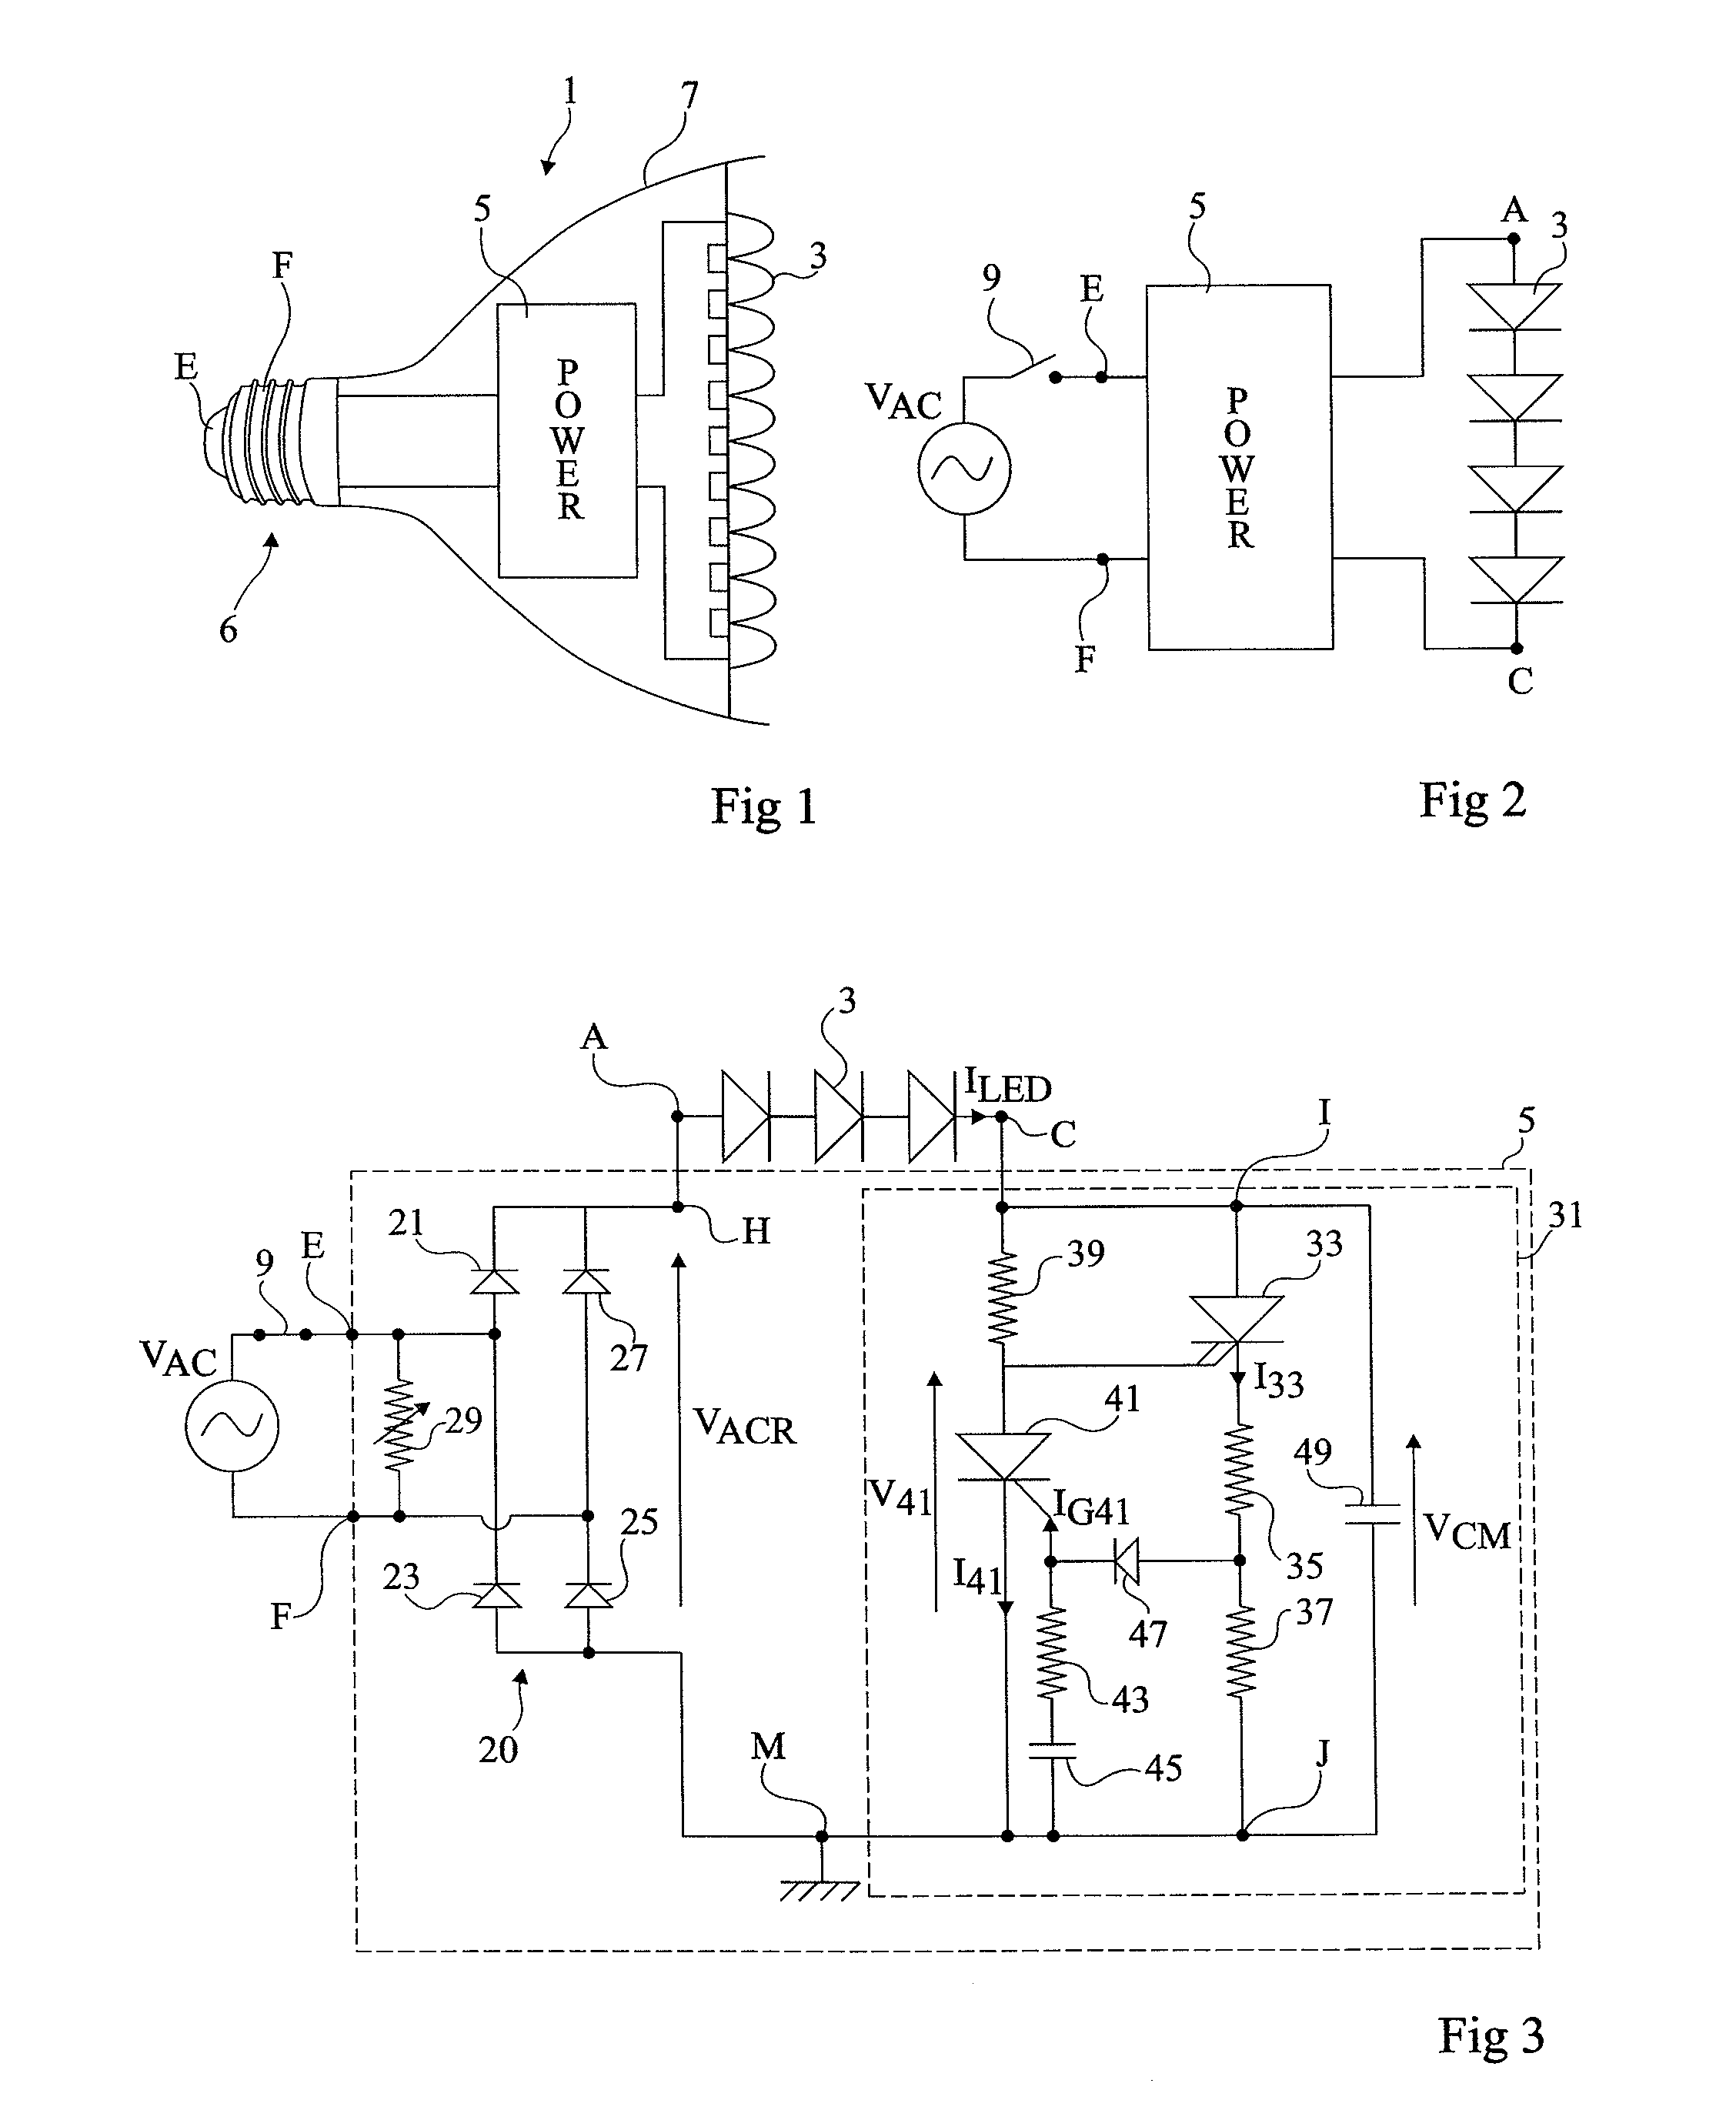 Circuit for controlling a lighting unit with light-emitting diodes